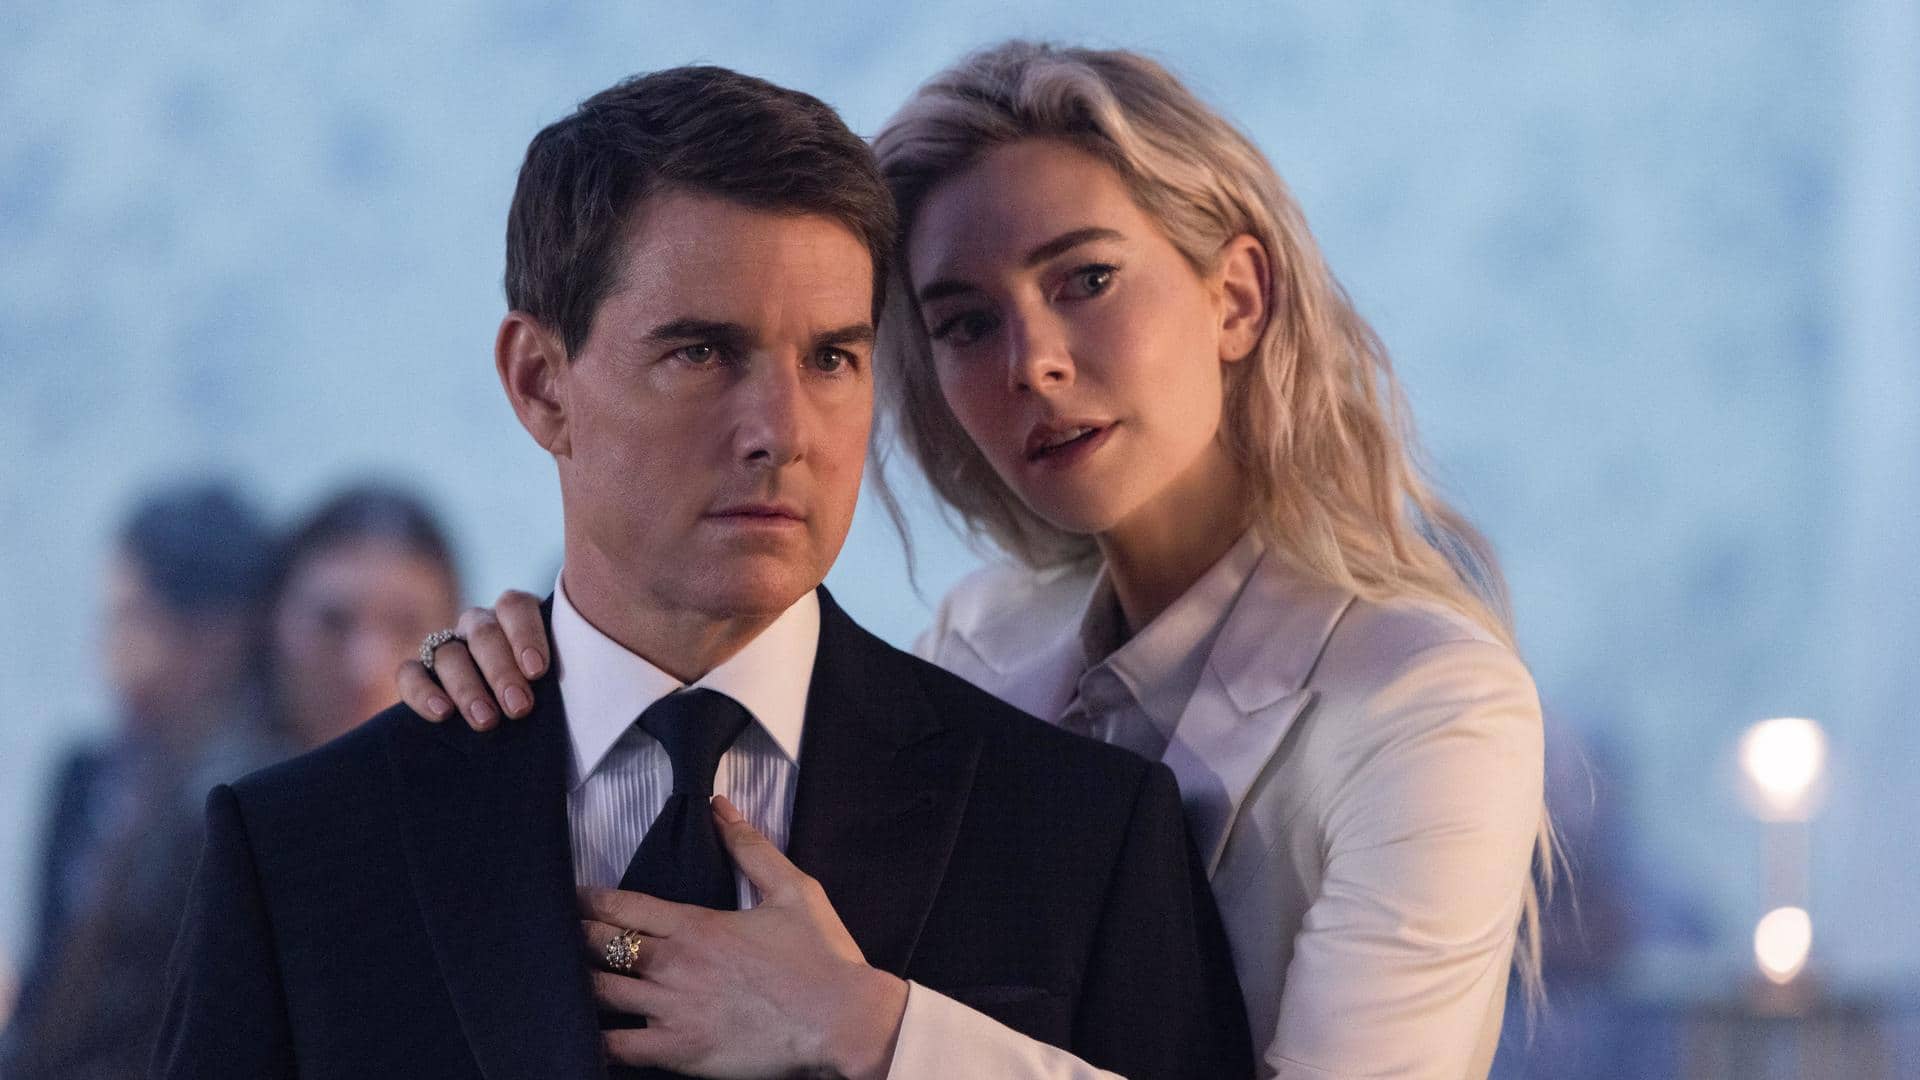 #BoxOfficeCollection: 'Mission: Impossible 7' opens with promising numbers